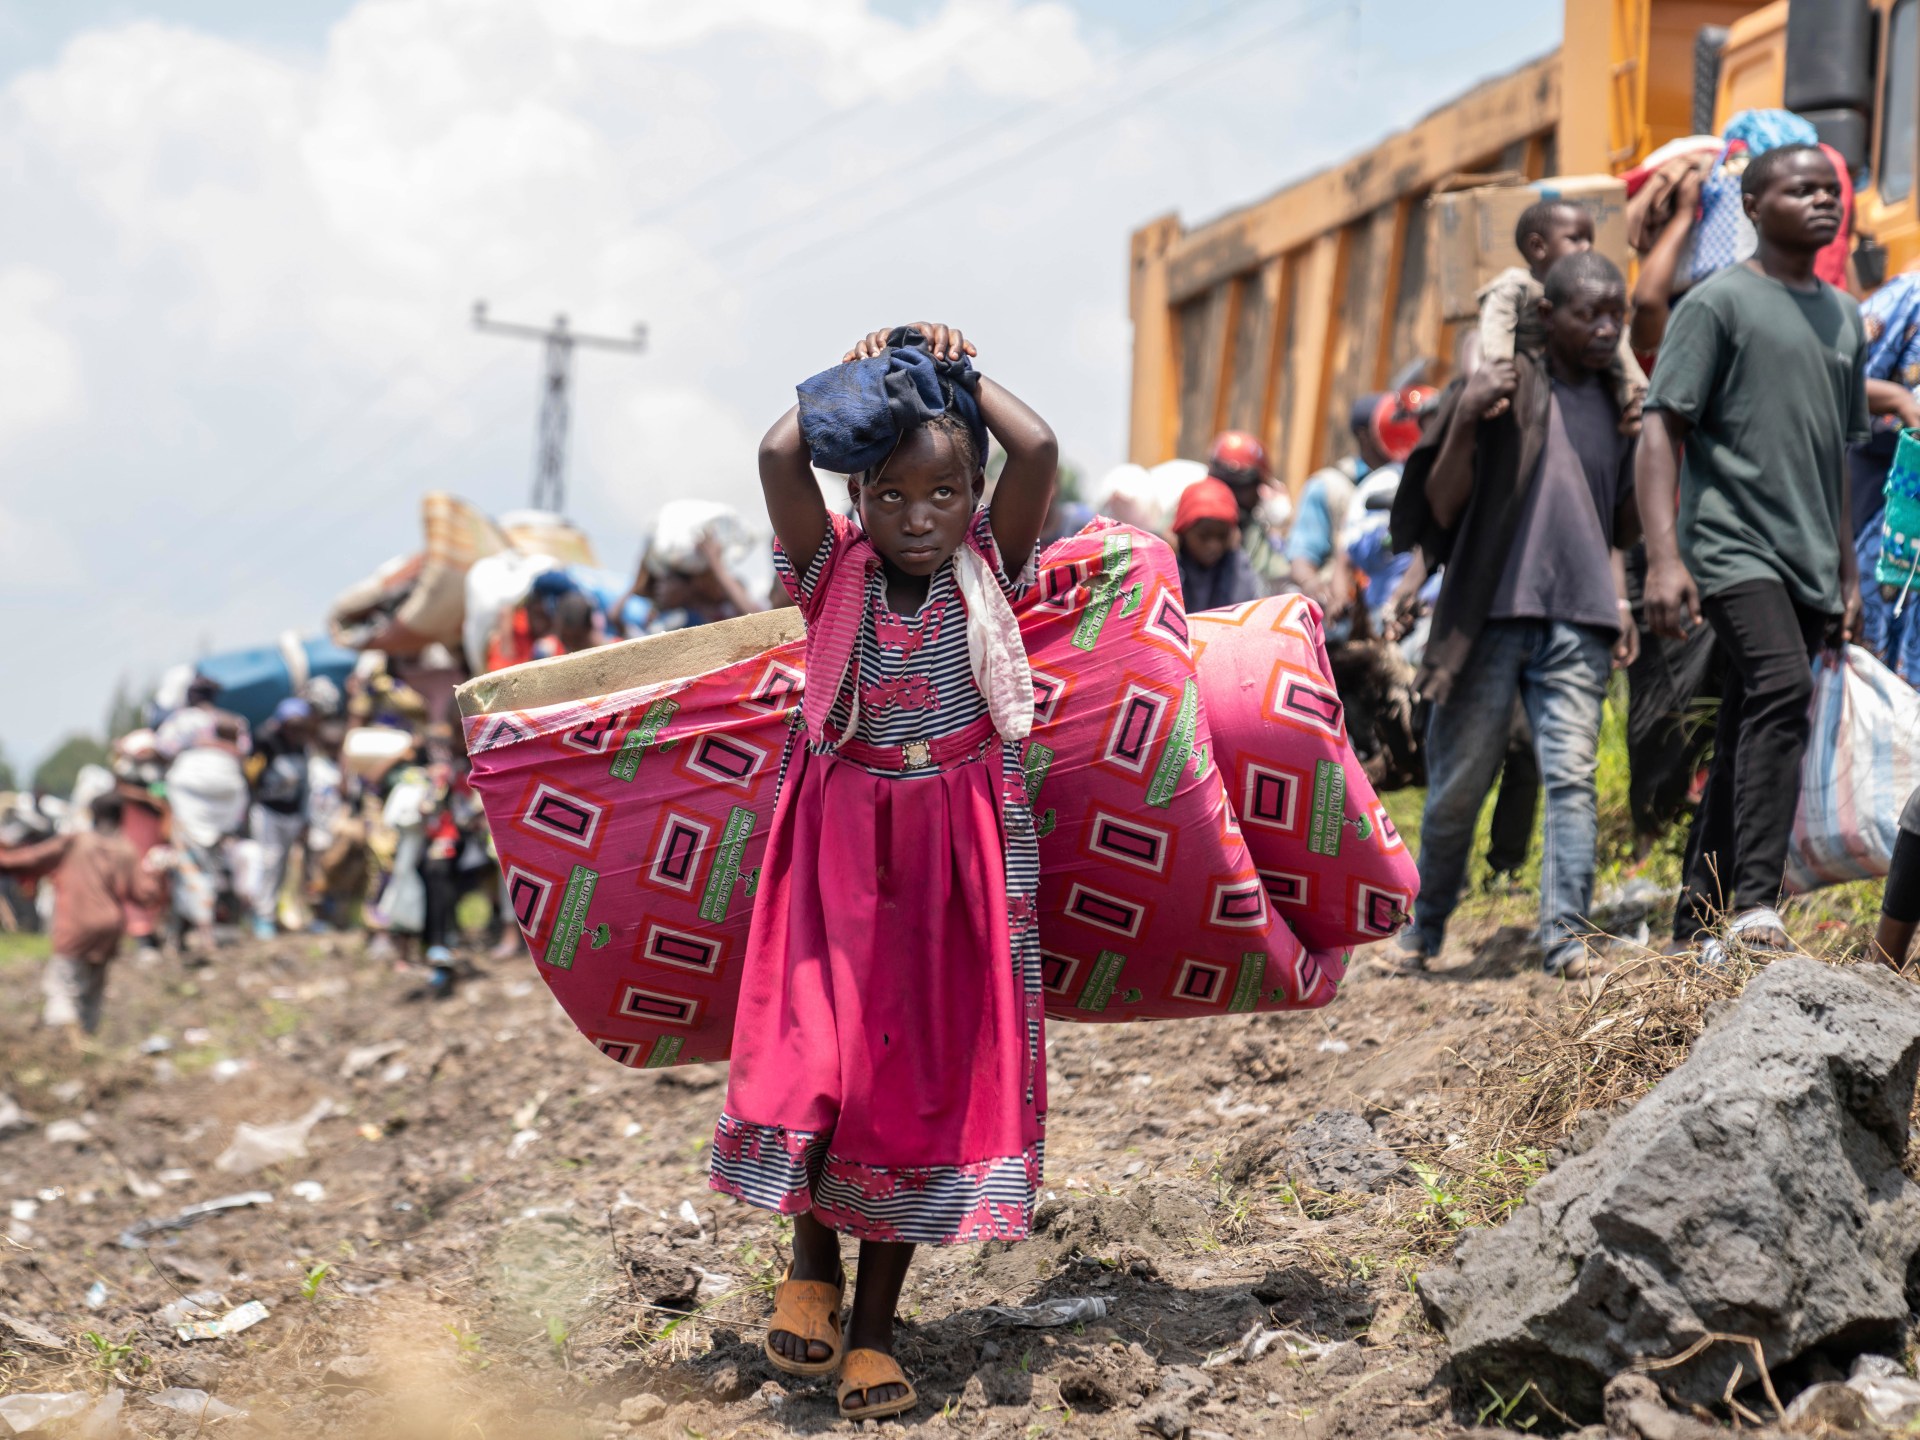 Eastern DRC ‘at breaking point’ as security, humanitarian crises worsen | Armed Groups News